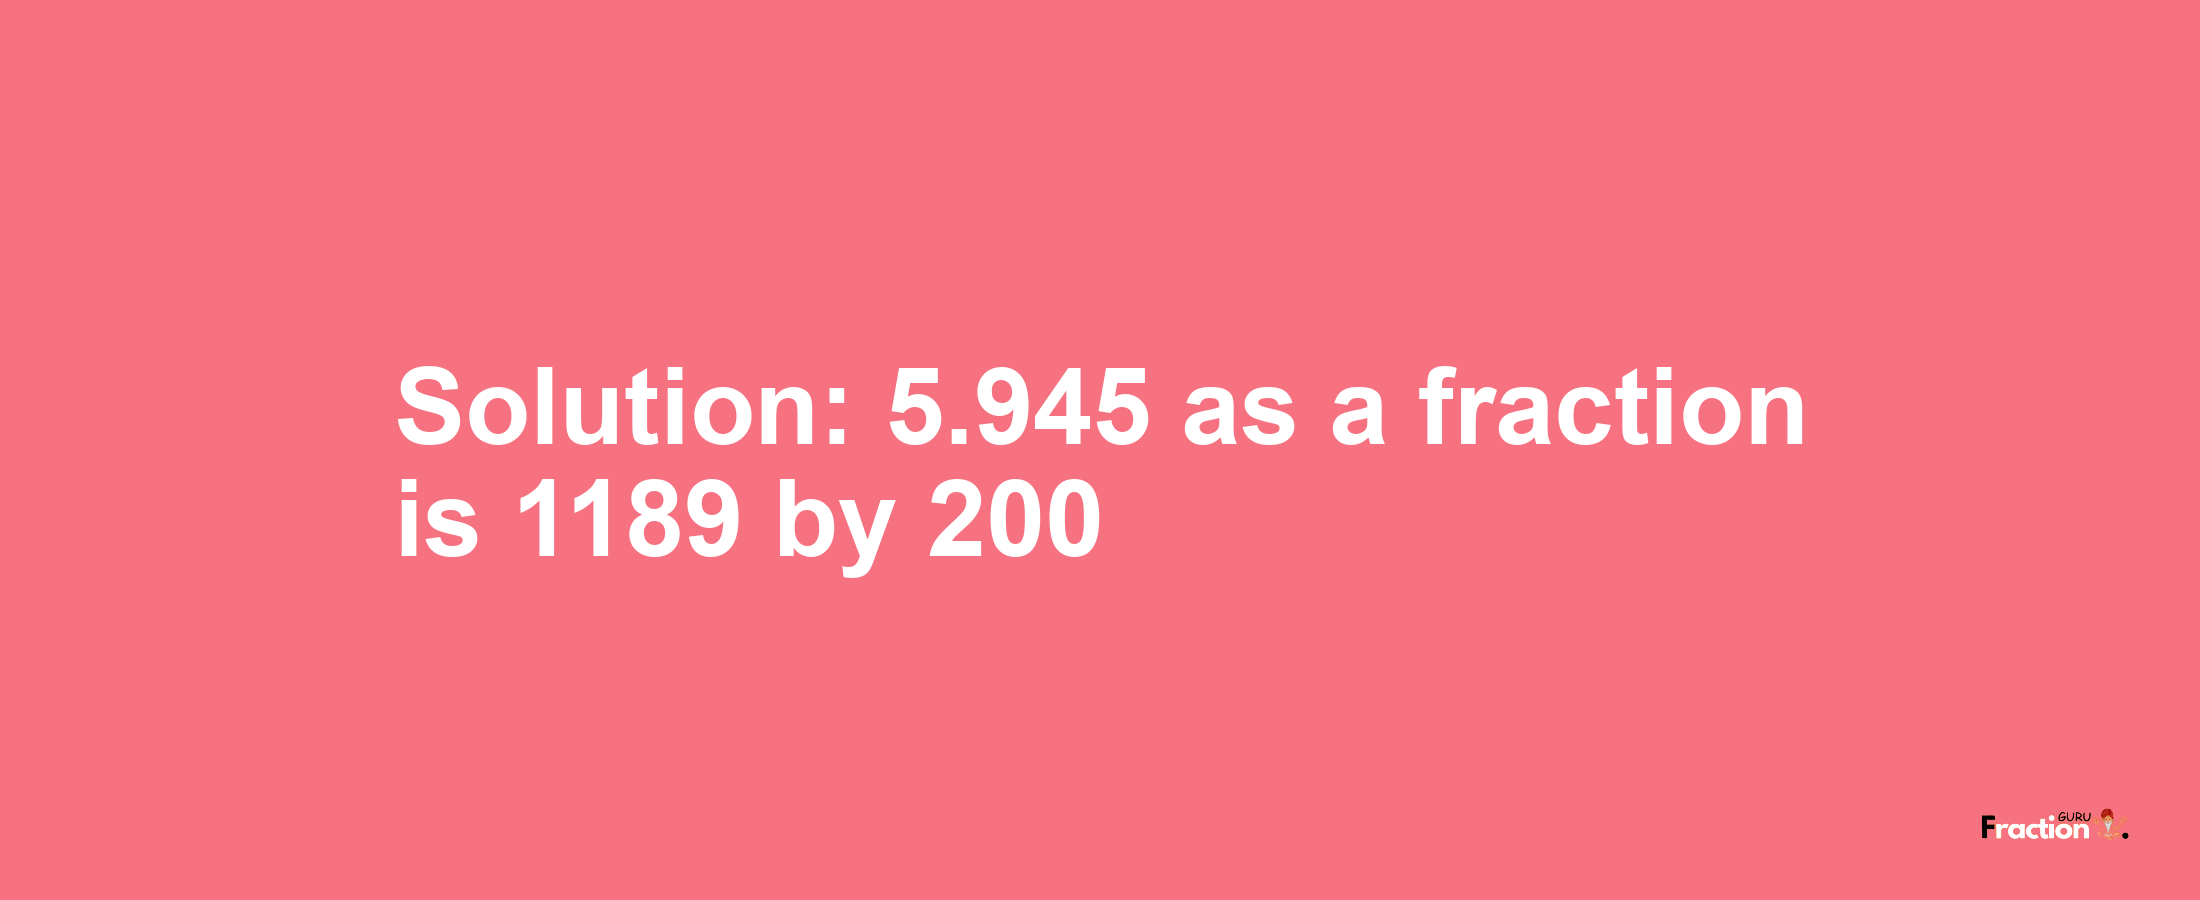 Solution:5.945 as a fraction is 1189/200